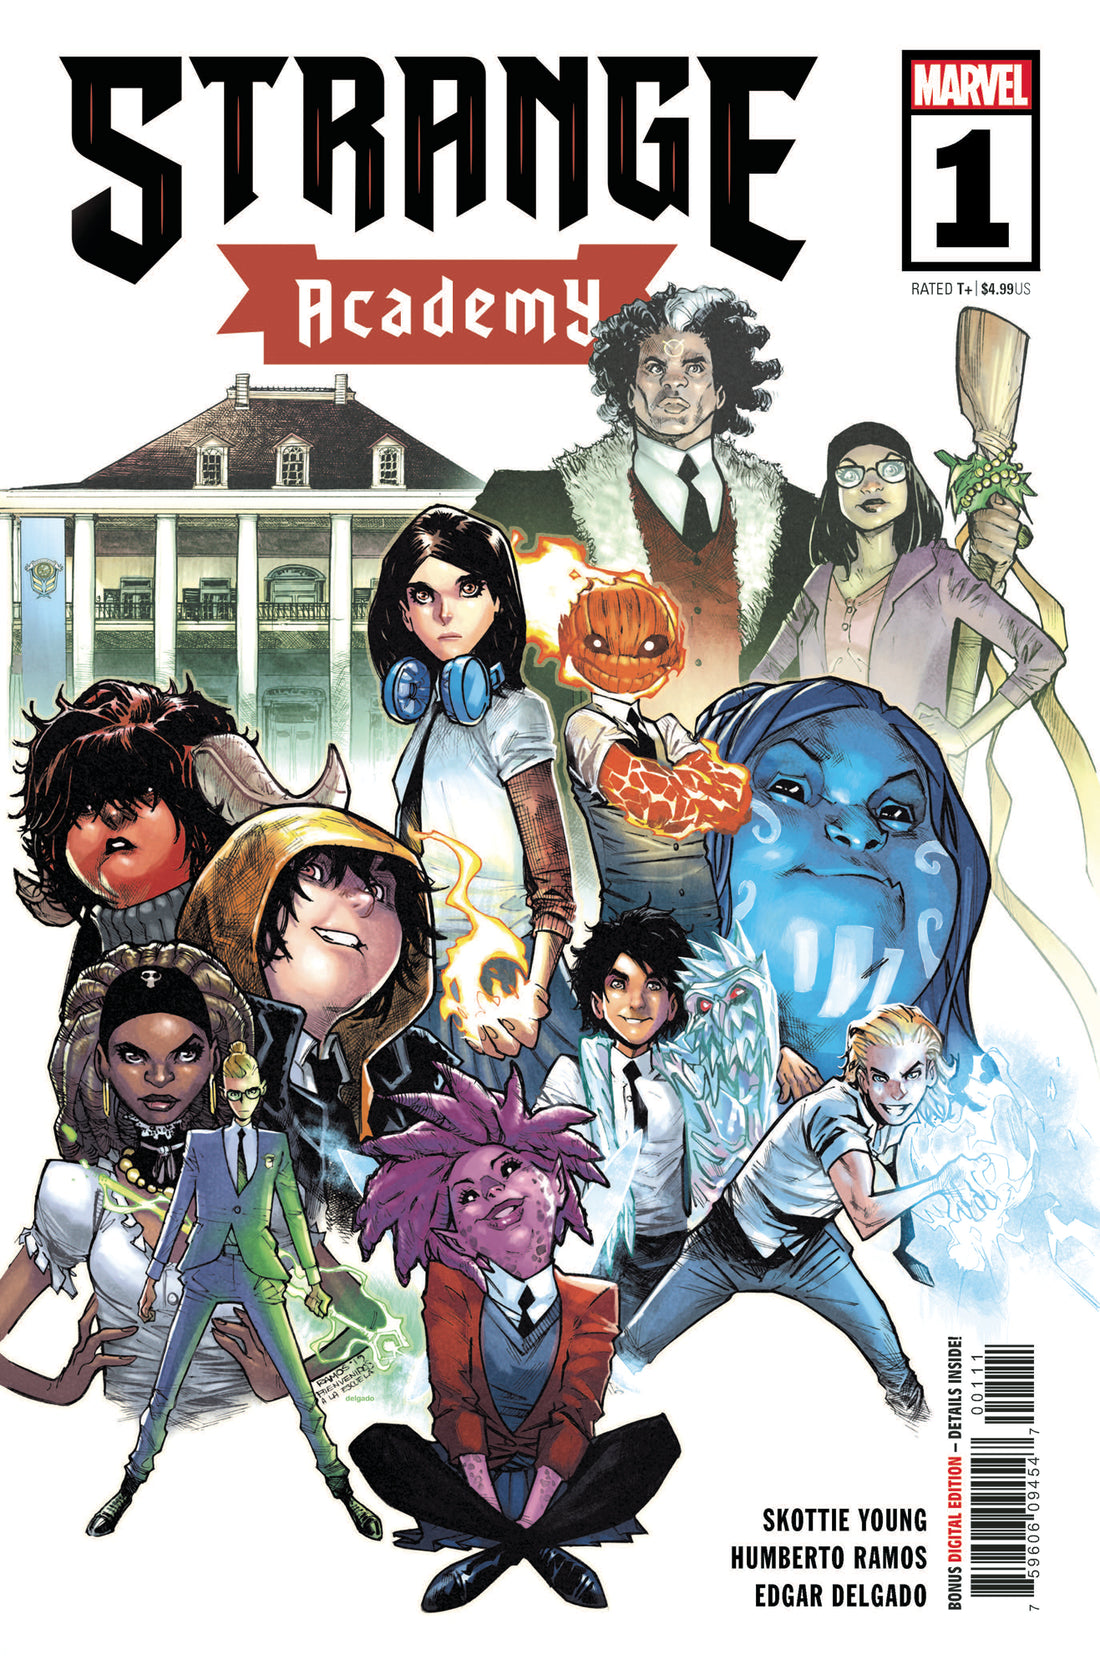 STRANGE ACADEMY #1 MEET THE 11 NEW  CHARACTERS